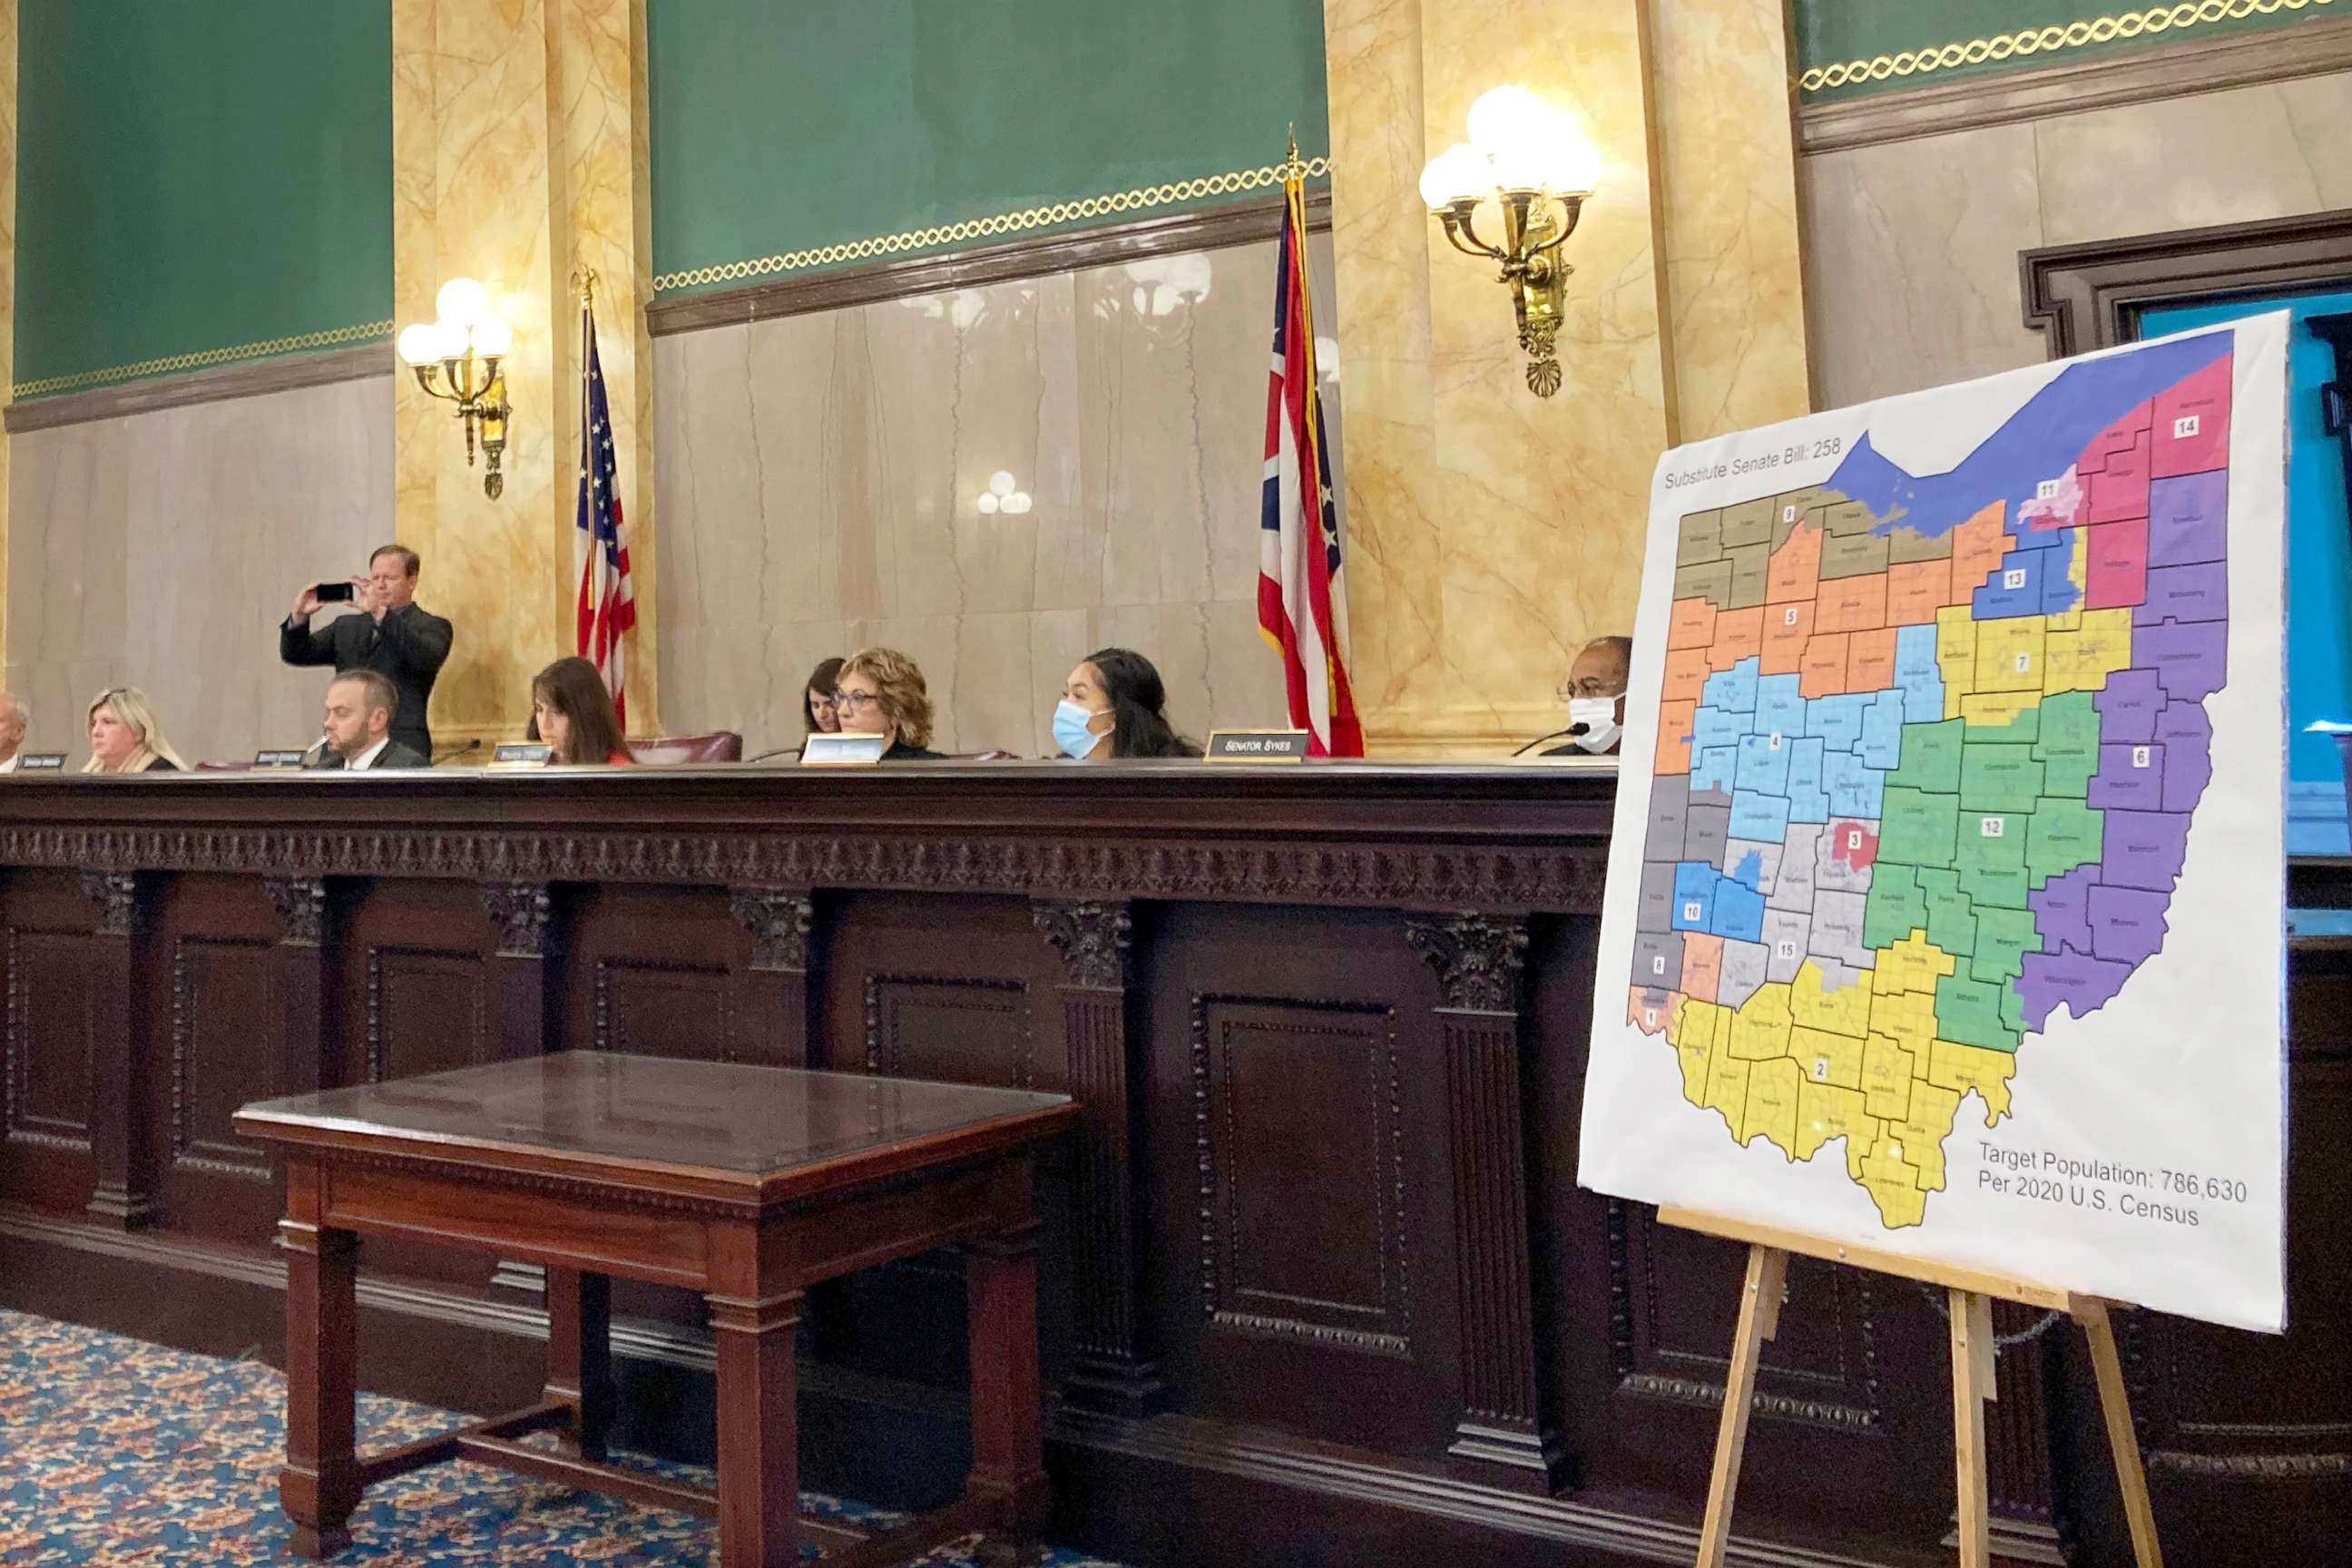 PHOTO: In this Nov. 16, 2021, file photo, members of the Ohio Senate Government Oversight Committee hear testimony on a new map of state congressional districts, at the Ohio Statehouse in Columbus, Ohio.